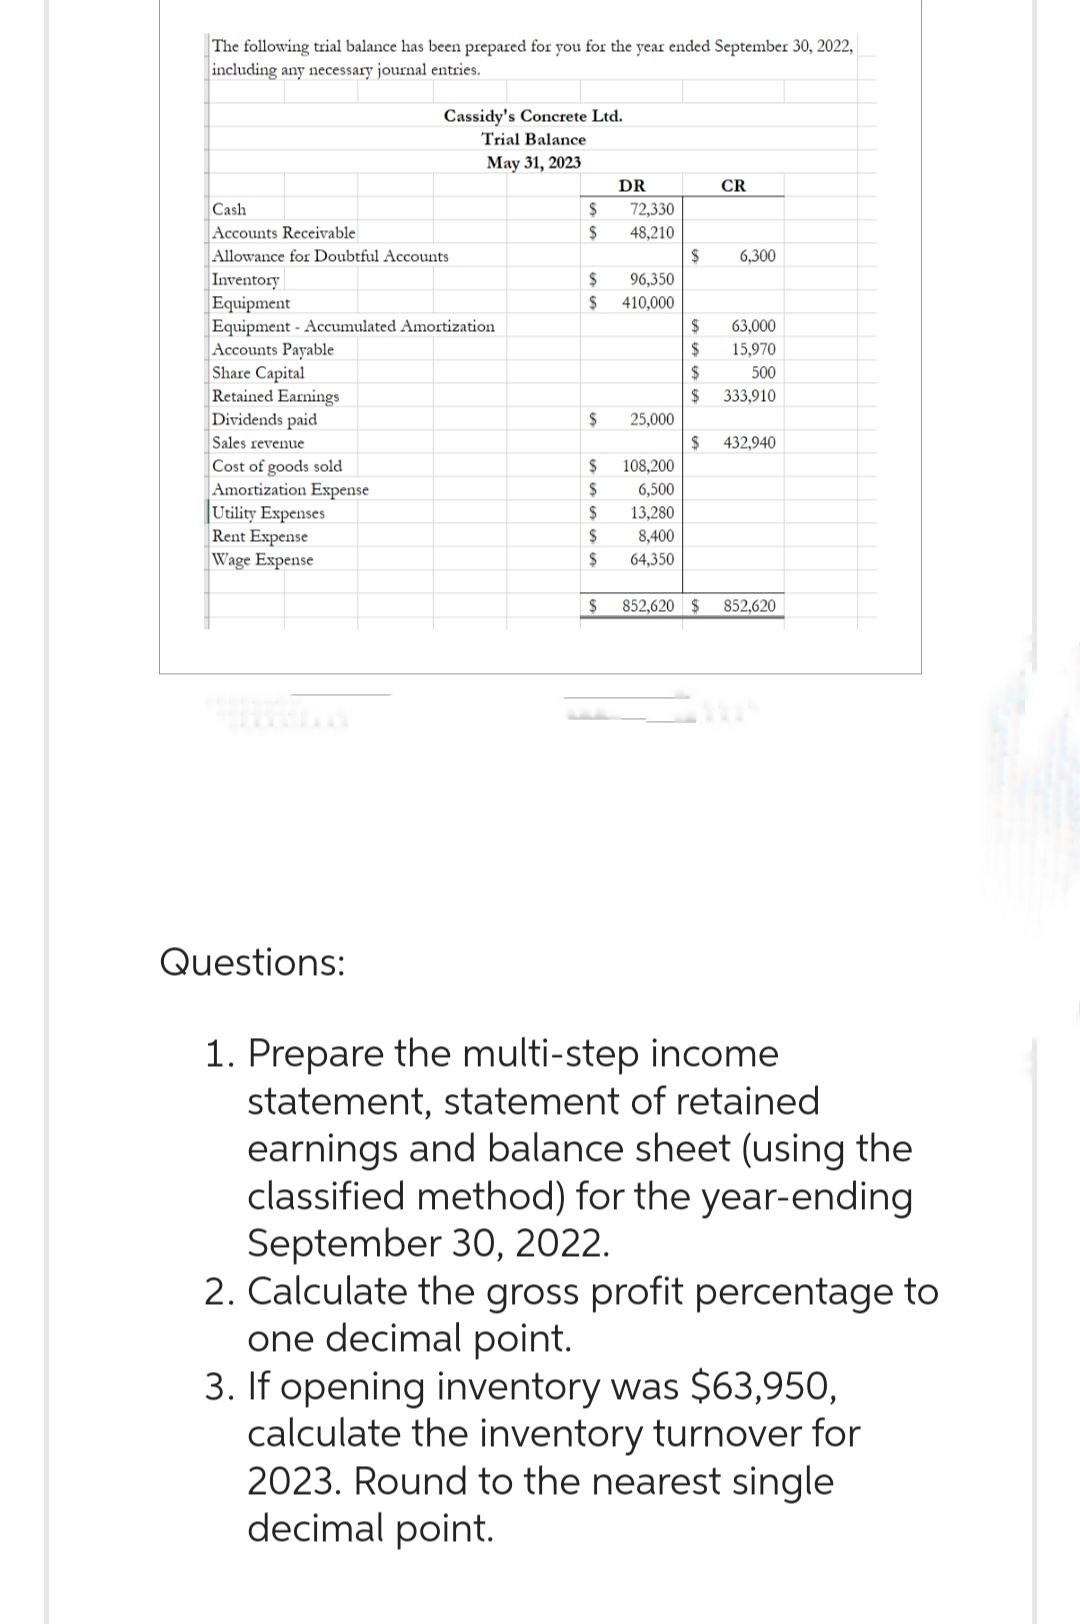 The following trial balance has been prepared for you for the year ended September 30, 2022,
including any necessary journal entries.
Cash
Accounts Receivable
Allowance for Doubtful Accounts
Inventory
Equipment
Equipment - Accumulated Amortization
Accounts Payable
Share Capital
Retained Earnings
Dividends paid
Sales revenue
Cost of goods sold
Amortization Expense
Cassidy's Concrete Ltd.
Trial Balance
May 31, 2023
Utility Expenses
Rent Expense
Wage Expense
Questions:
$
$
DR
72,330
48,210
$
96,350
$ 410,000
$
$
$
S
$
$ 25,000
108,200
6,500
13,280
8,400
64,350
$
$
$
$
$
CR
6,300
63,000
15,970
500
333,910
$ 432,940
$ 852,620 $ 852,620
1. Prepare the multi-step income
statement, statement of retained
earnings and balance sheet (using the
classified method) for the year-ending
September 30, 2022.
2. Calculate the gross profit percentage to
one decimal point.
3. If opening inventory was $63,950,
calculate the inventory turnover for
2023. Round to the nearest single
decimal point.